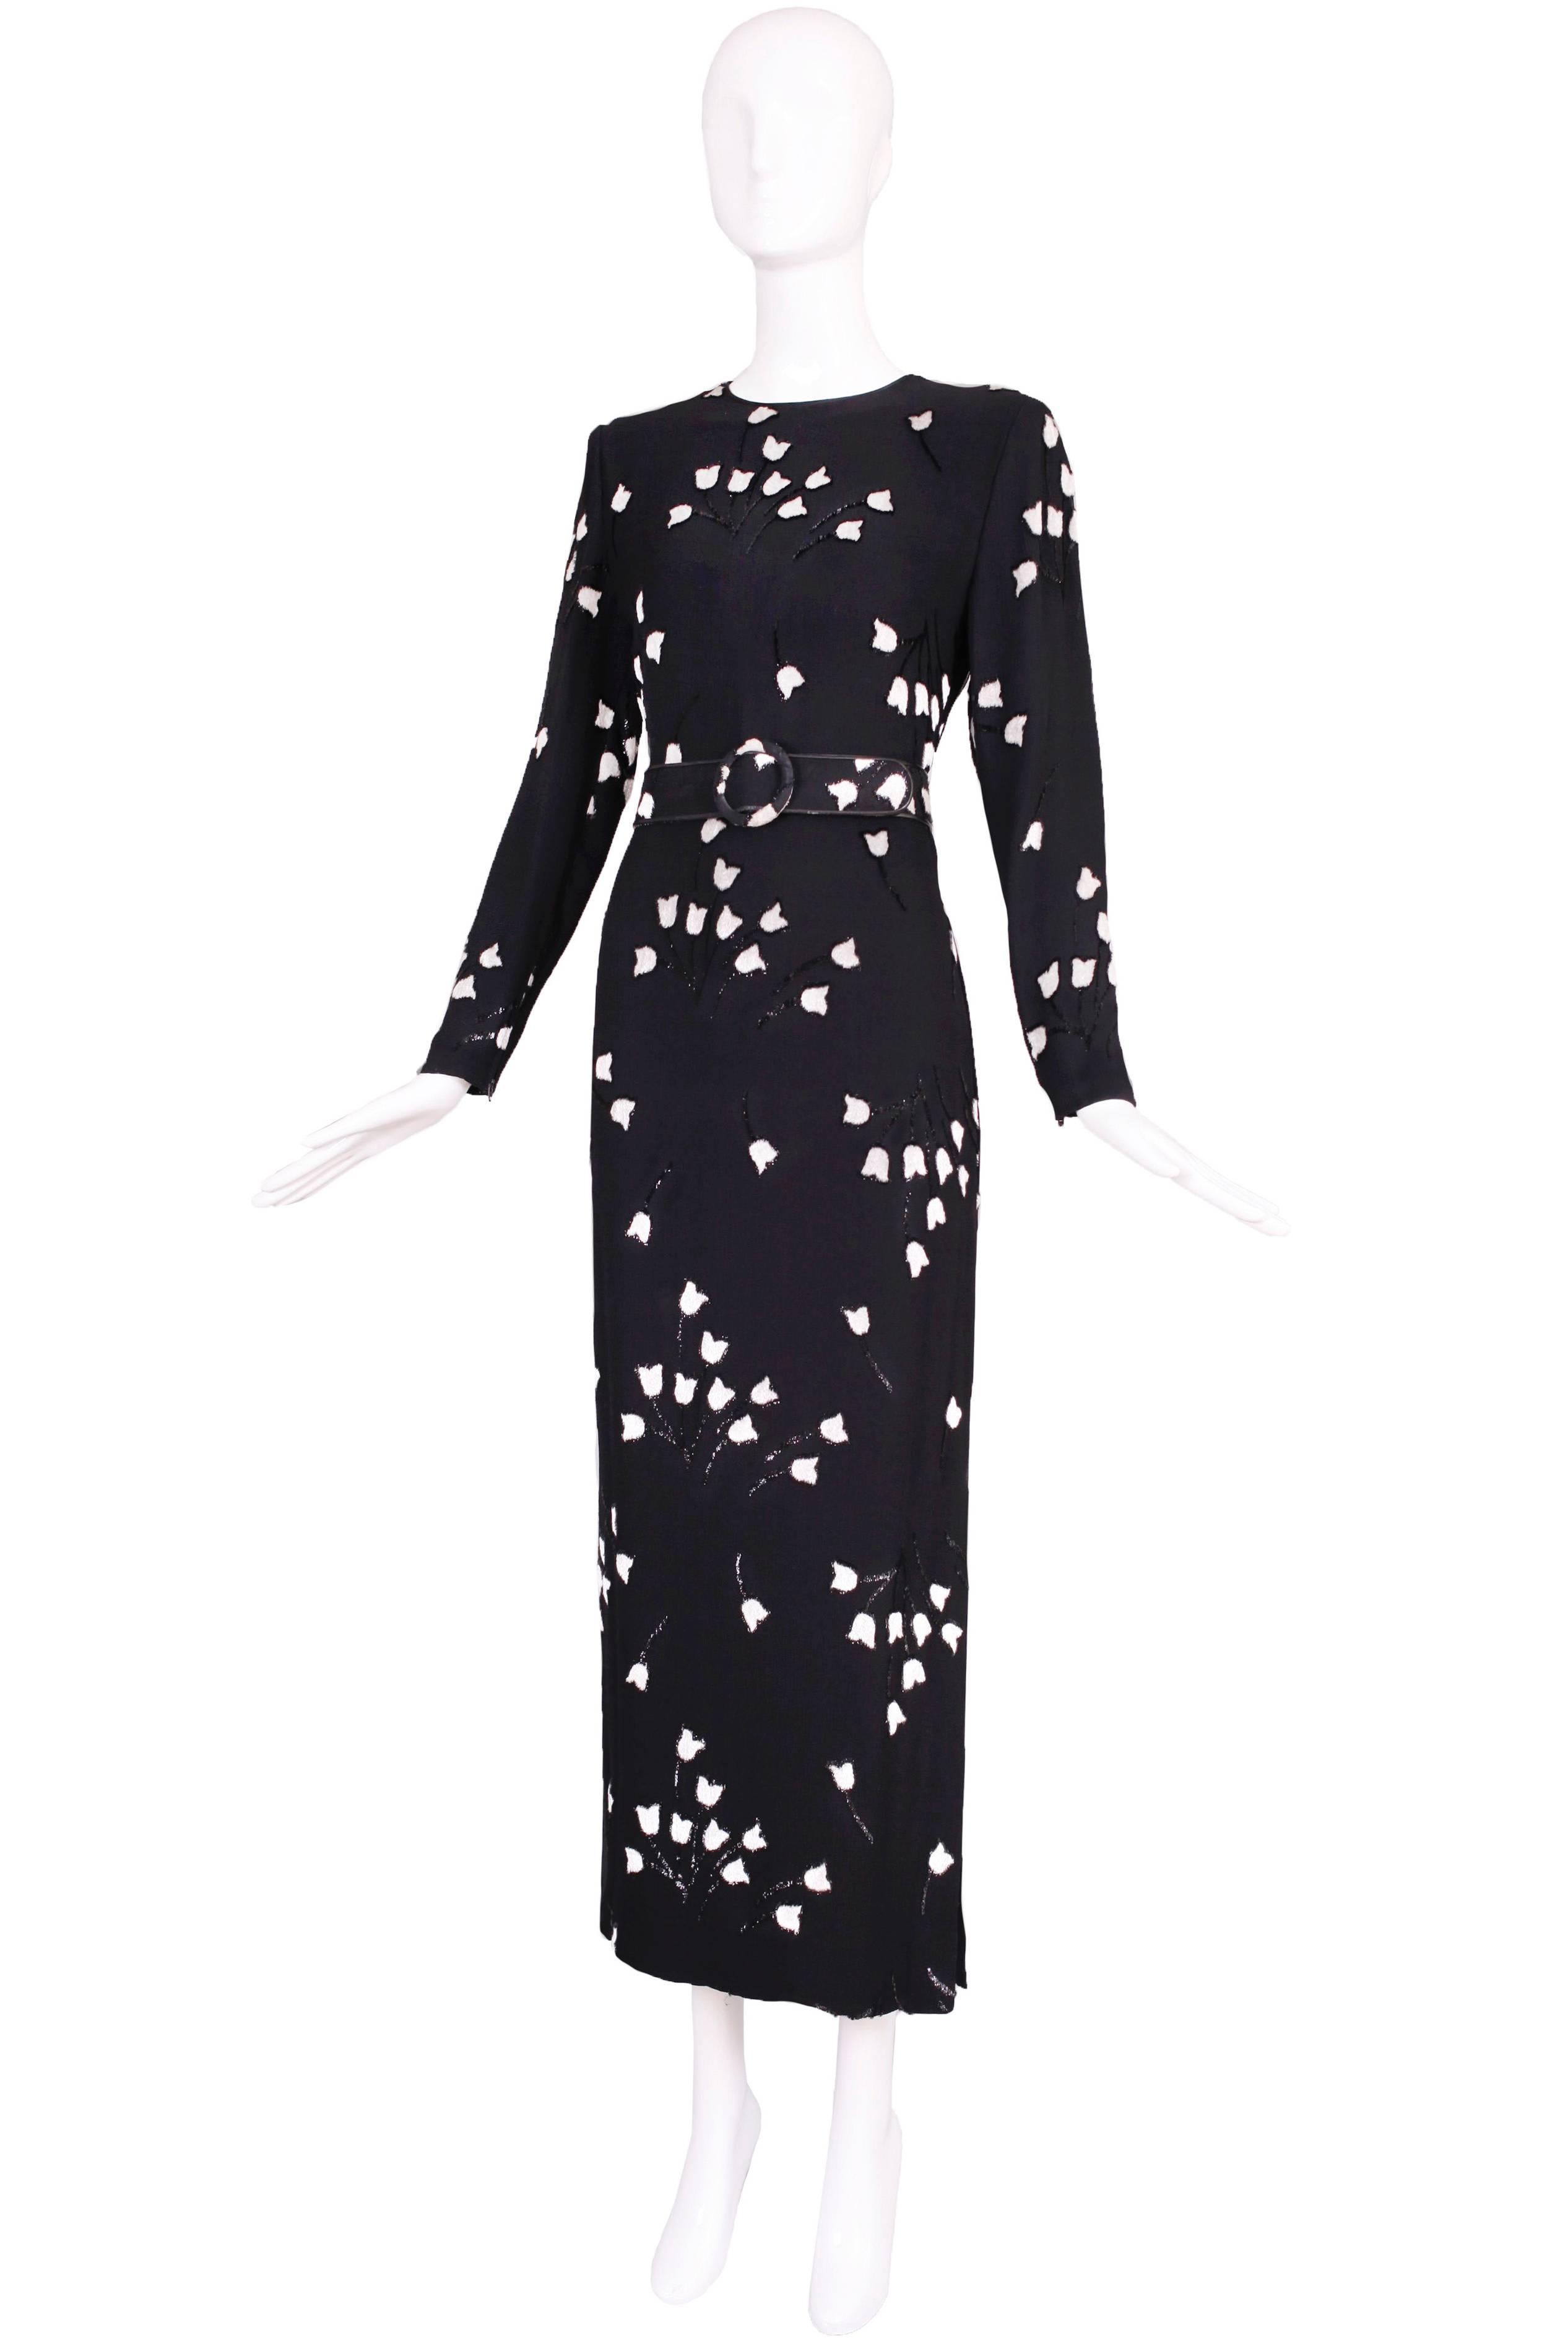 Galanos silk black velvet burnout long sleeved evening gown with white/gray tulip pattern. Features a side slit and zippers at the sleeves. The label was removed from the dress but the belt is stamped: Galanos. There is no size tag so please consult